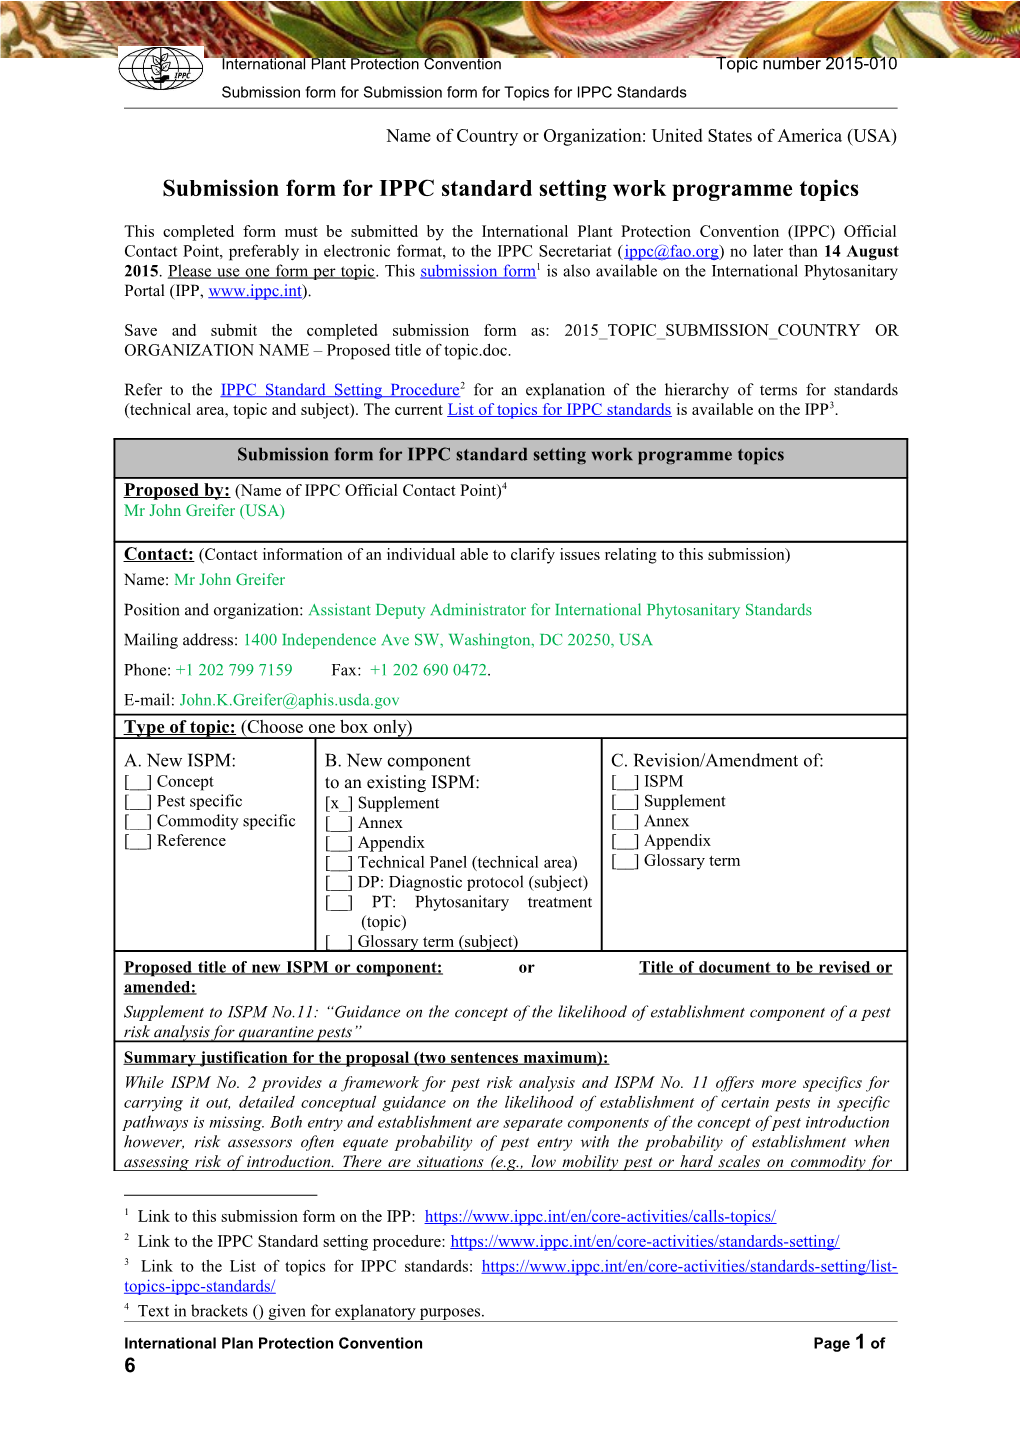 Submission Form for ICPM Work Programme Topics